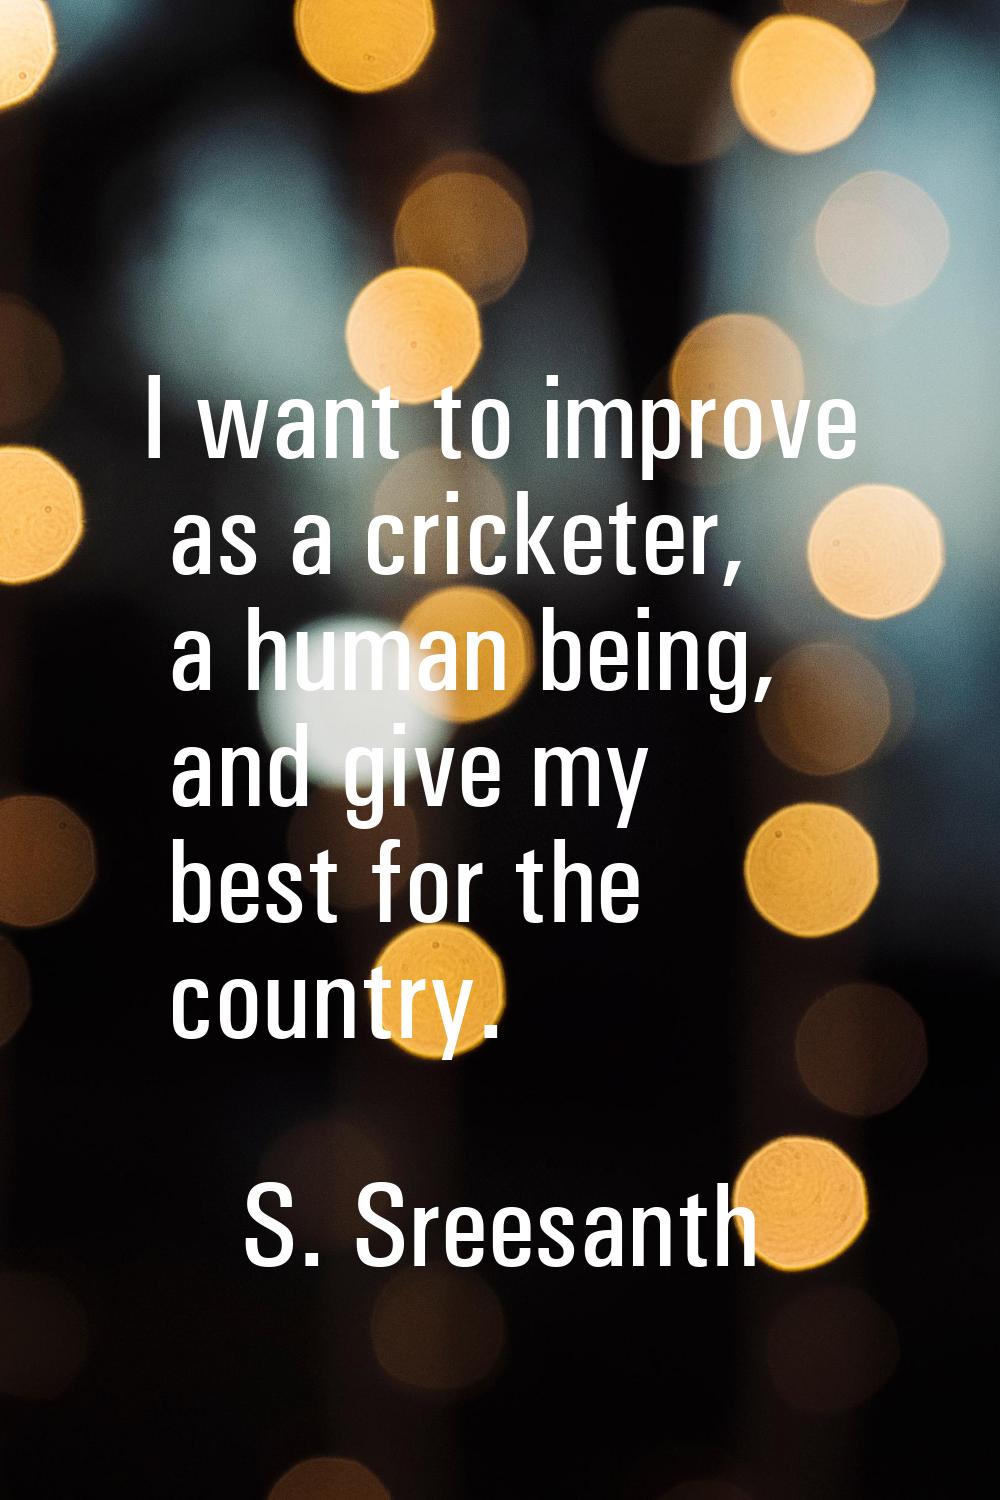 I want to improve as a cricketer, a human being, and give my best for the country.